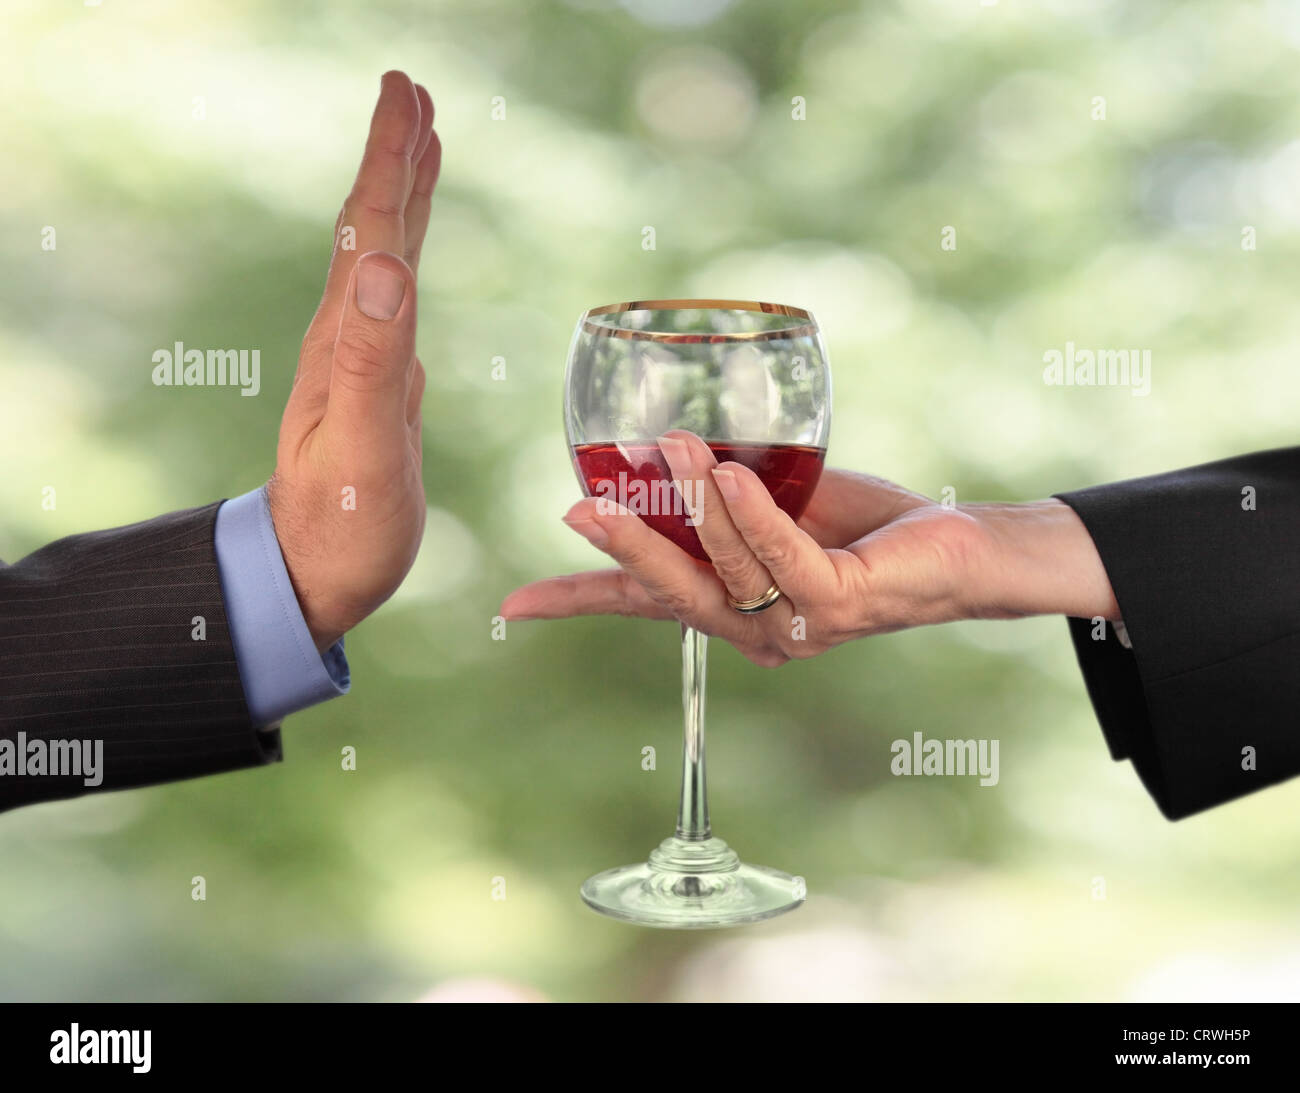 someone is being offered a drink which he is refusing Stock Photo